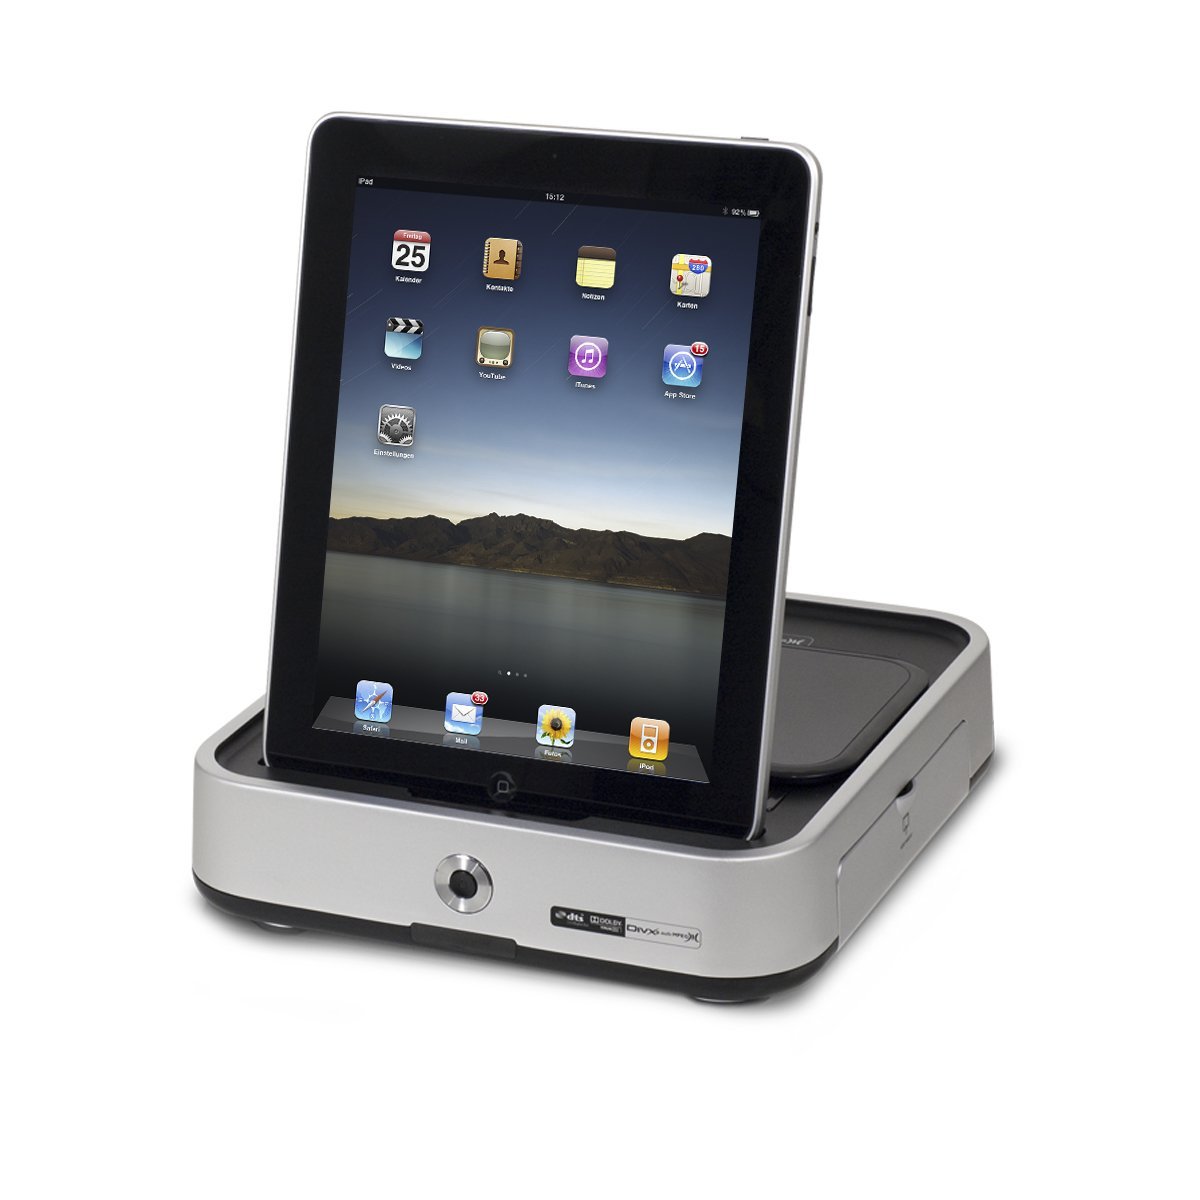 http://thetechjournal.com/wp-content/uploads/images/1107/1309800977-xtreamer-ixtreamer-hybrid-media-streamer-plus-dock-for-playing-ipad-iphone-ipod-and-itunes-2.jpg